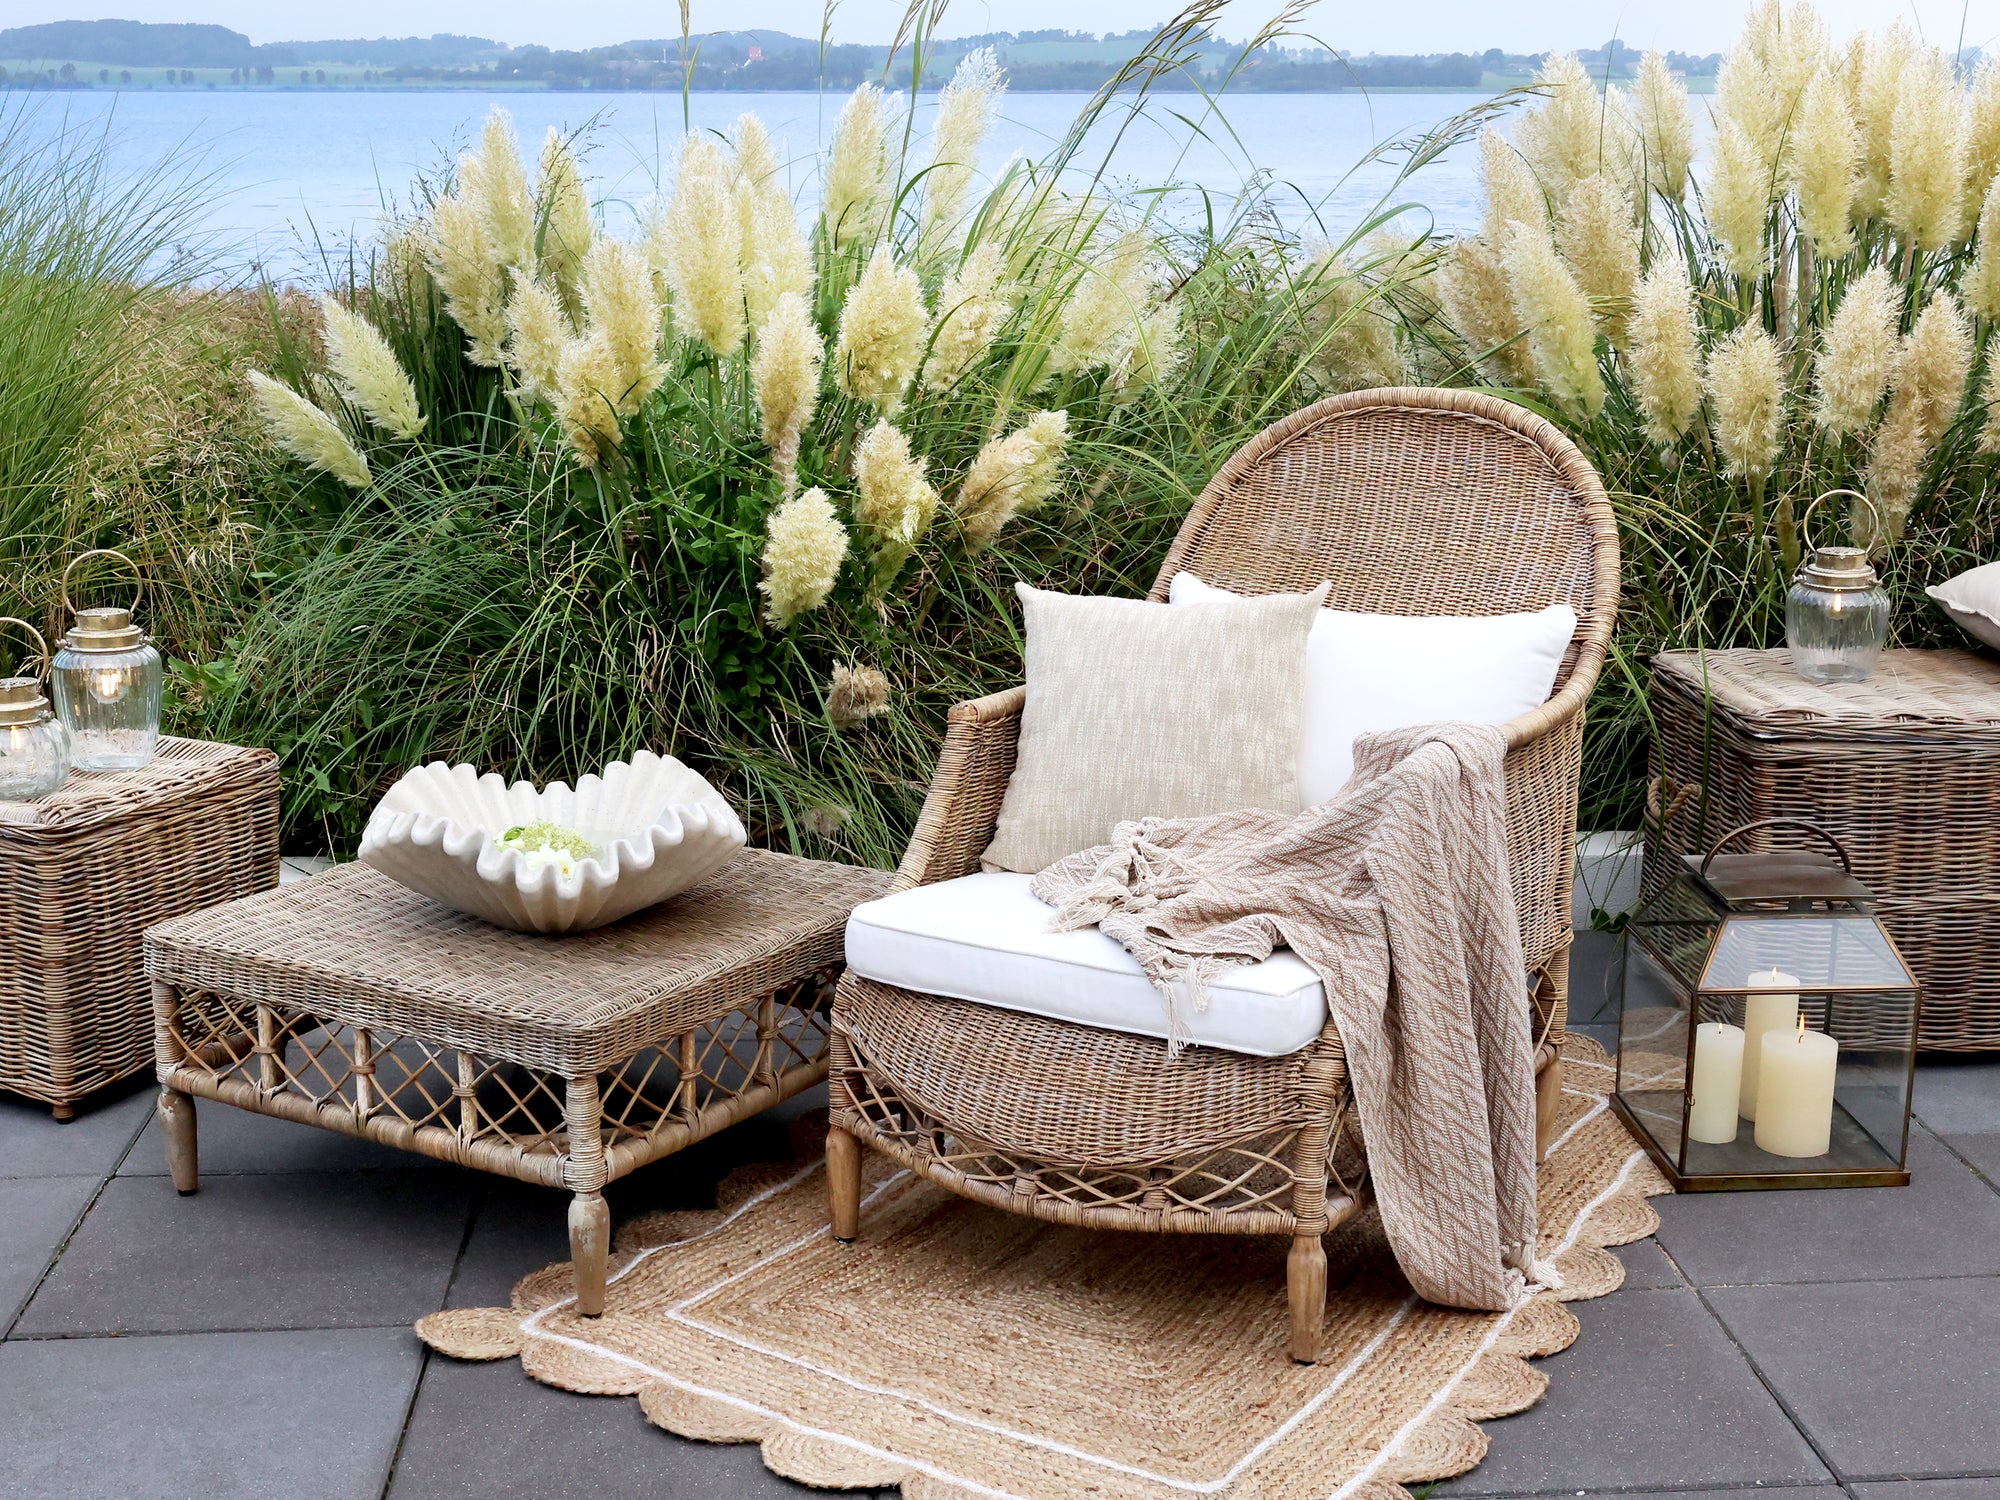 An outdoor living space with rattan furniture, lanterns a jute rug and pampas grass.